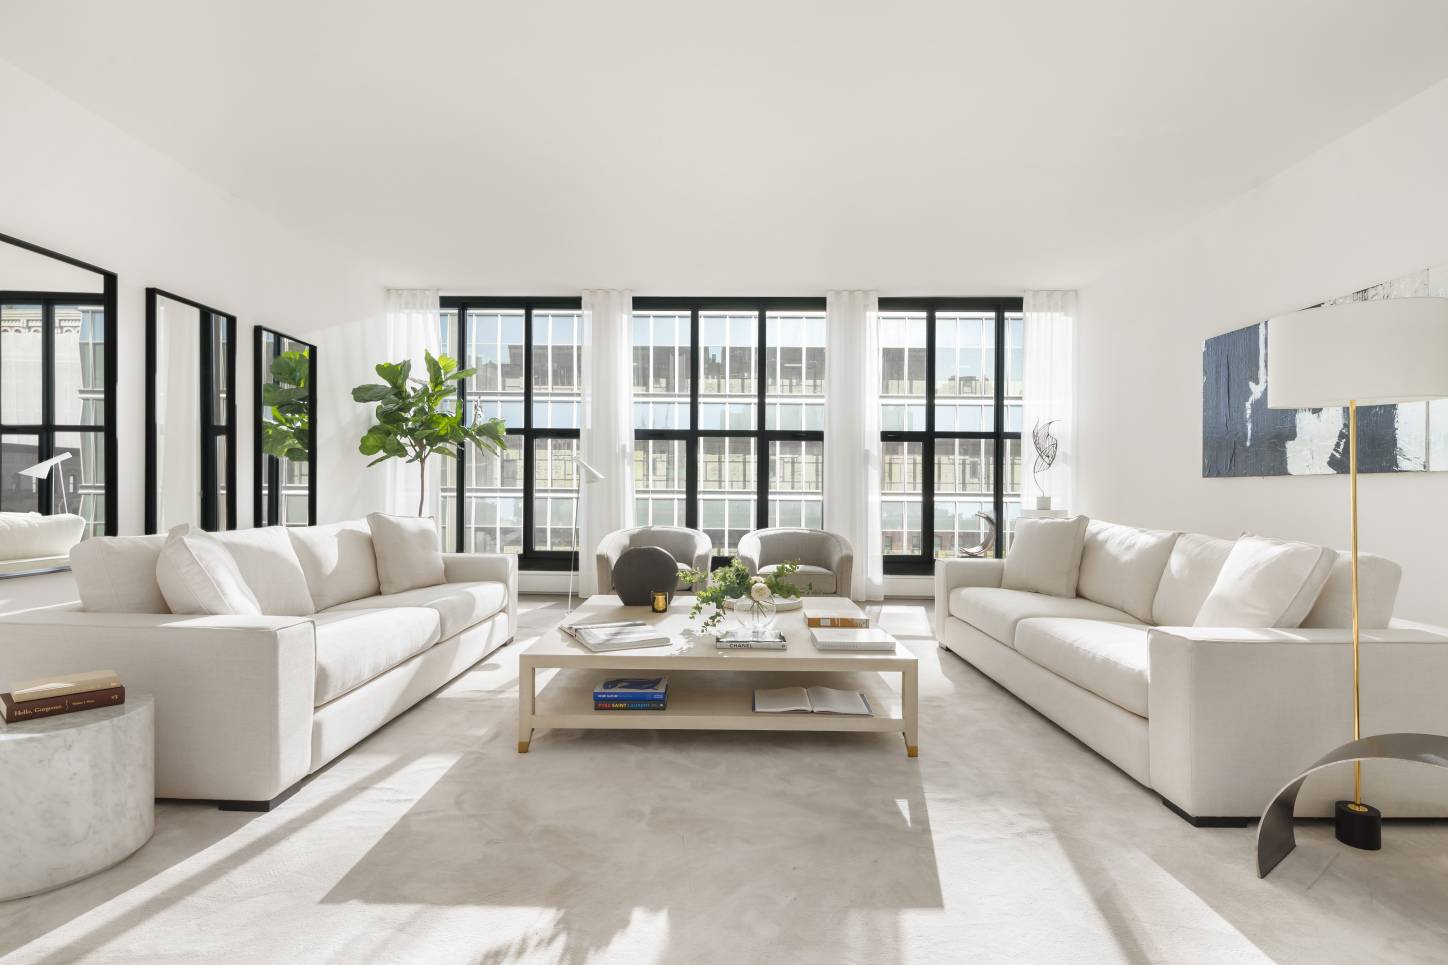 Located in a peaceful oasis of TriBeCa, this brand new five bedroom home offers 4, 176 square feet of interior space and three private terraces.